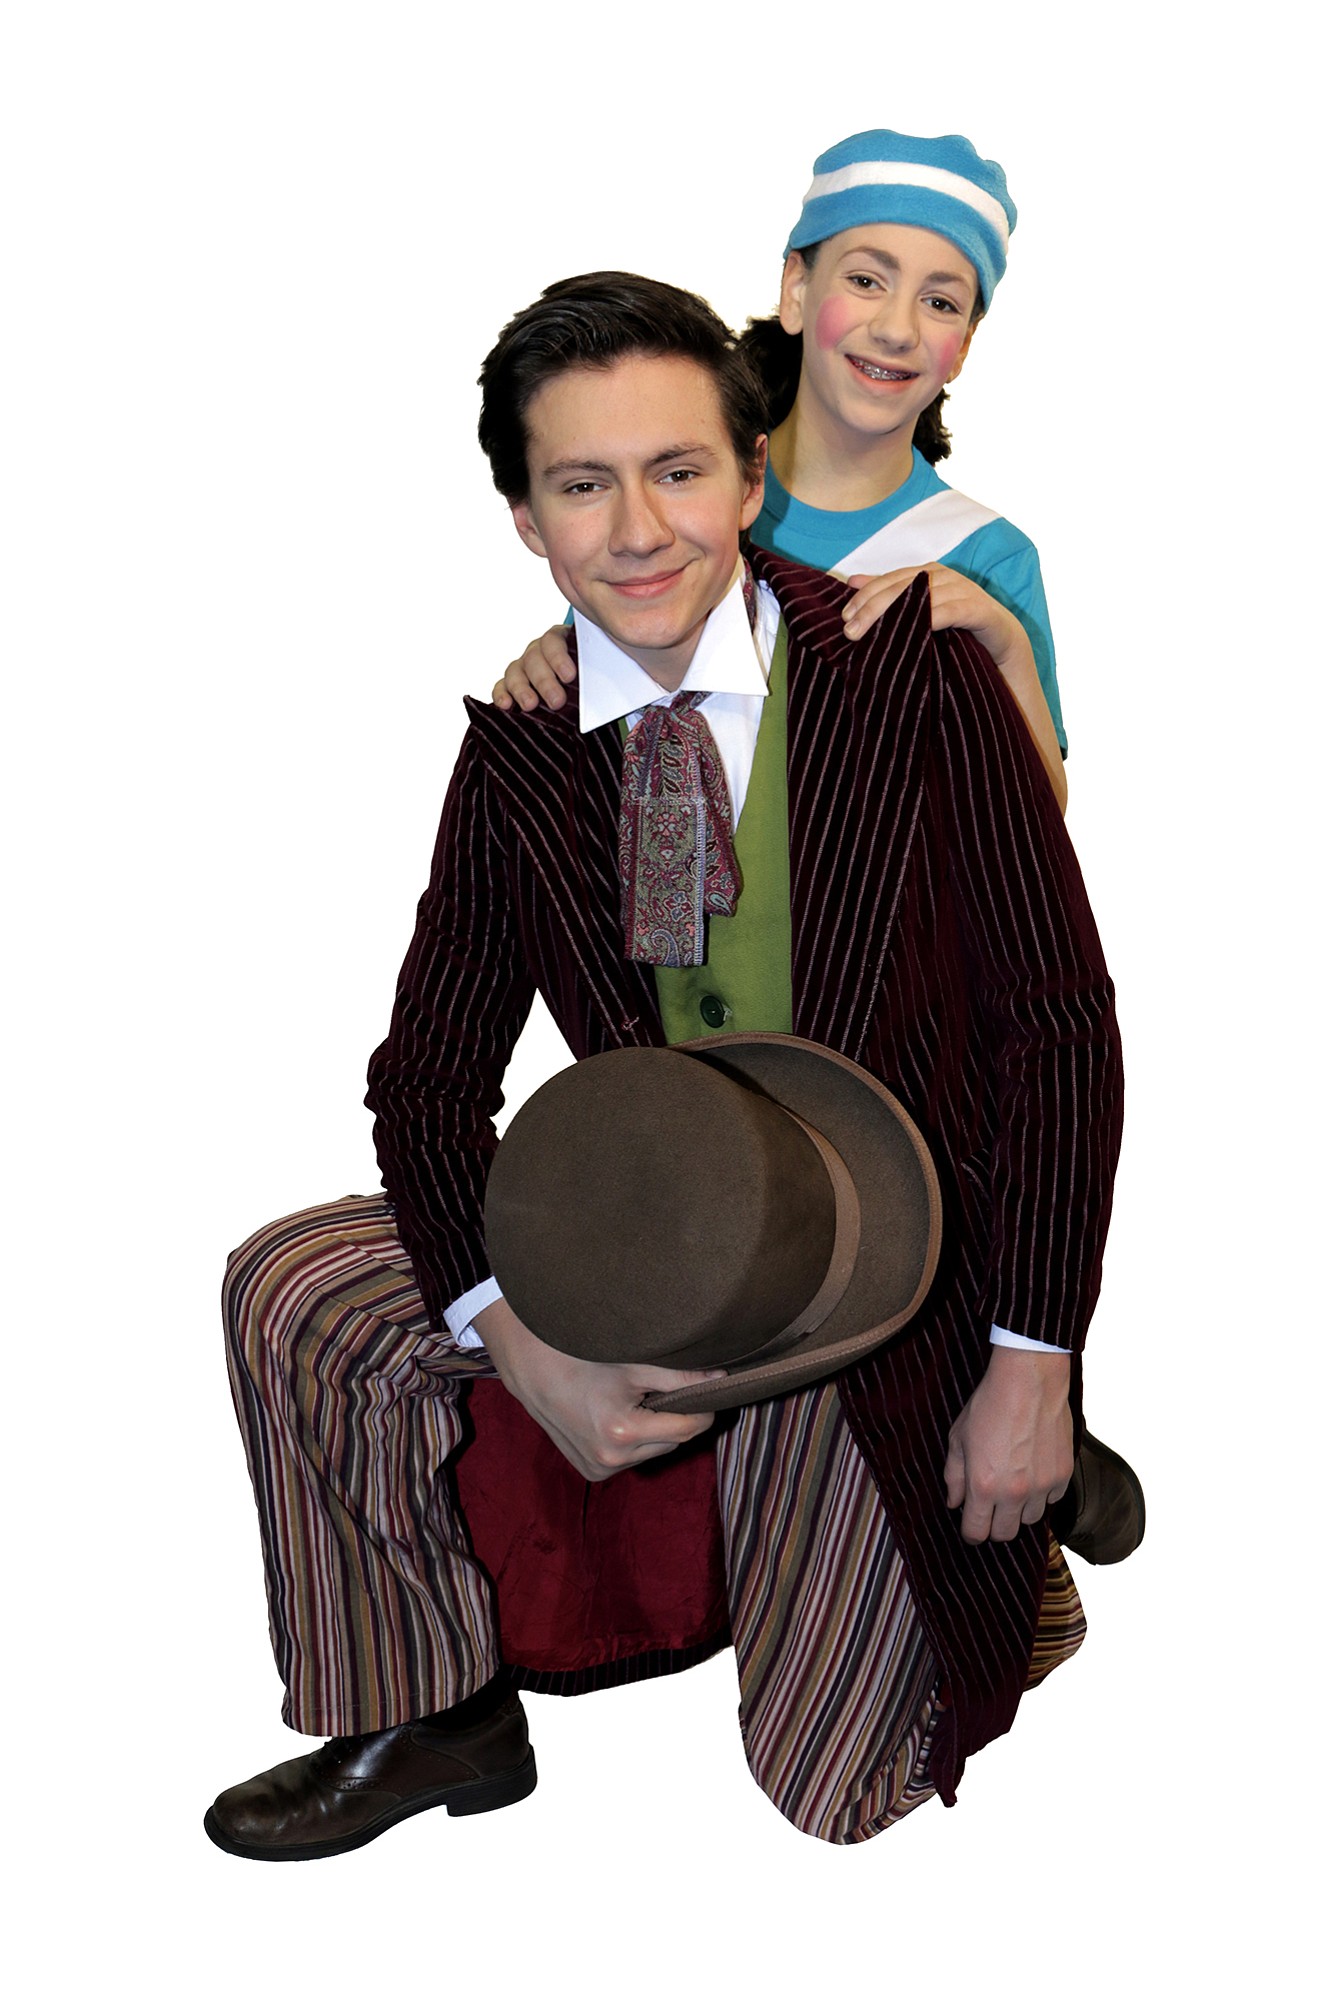 Journey Theater Arts Group presents &quot;Roald Dahl's Willy Wonka Jr.&quot; through March 1 at the Washburn Performing Arts Center in Washougal.